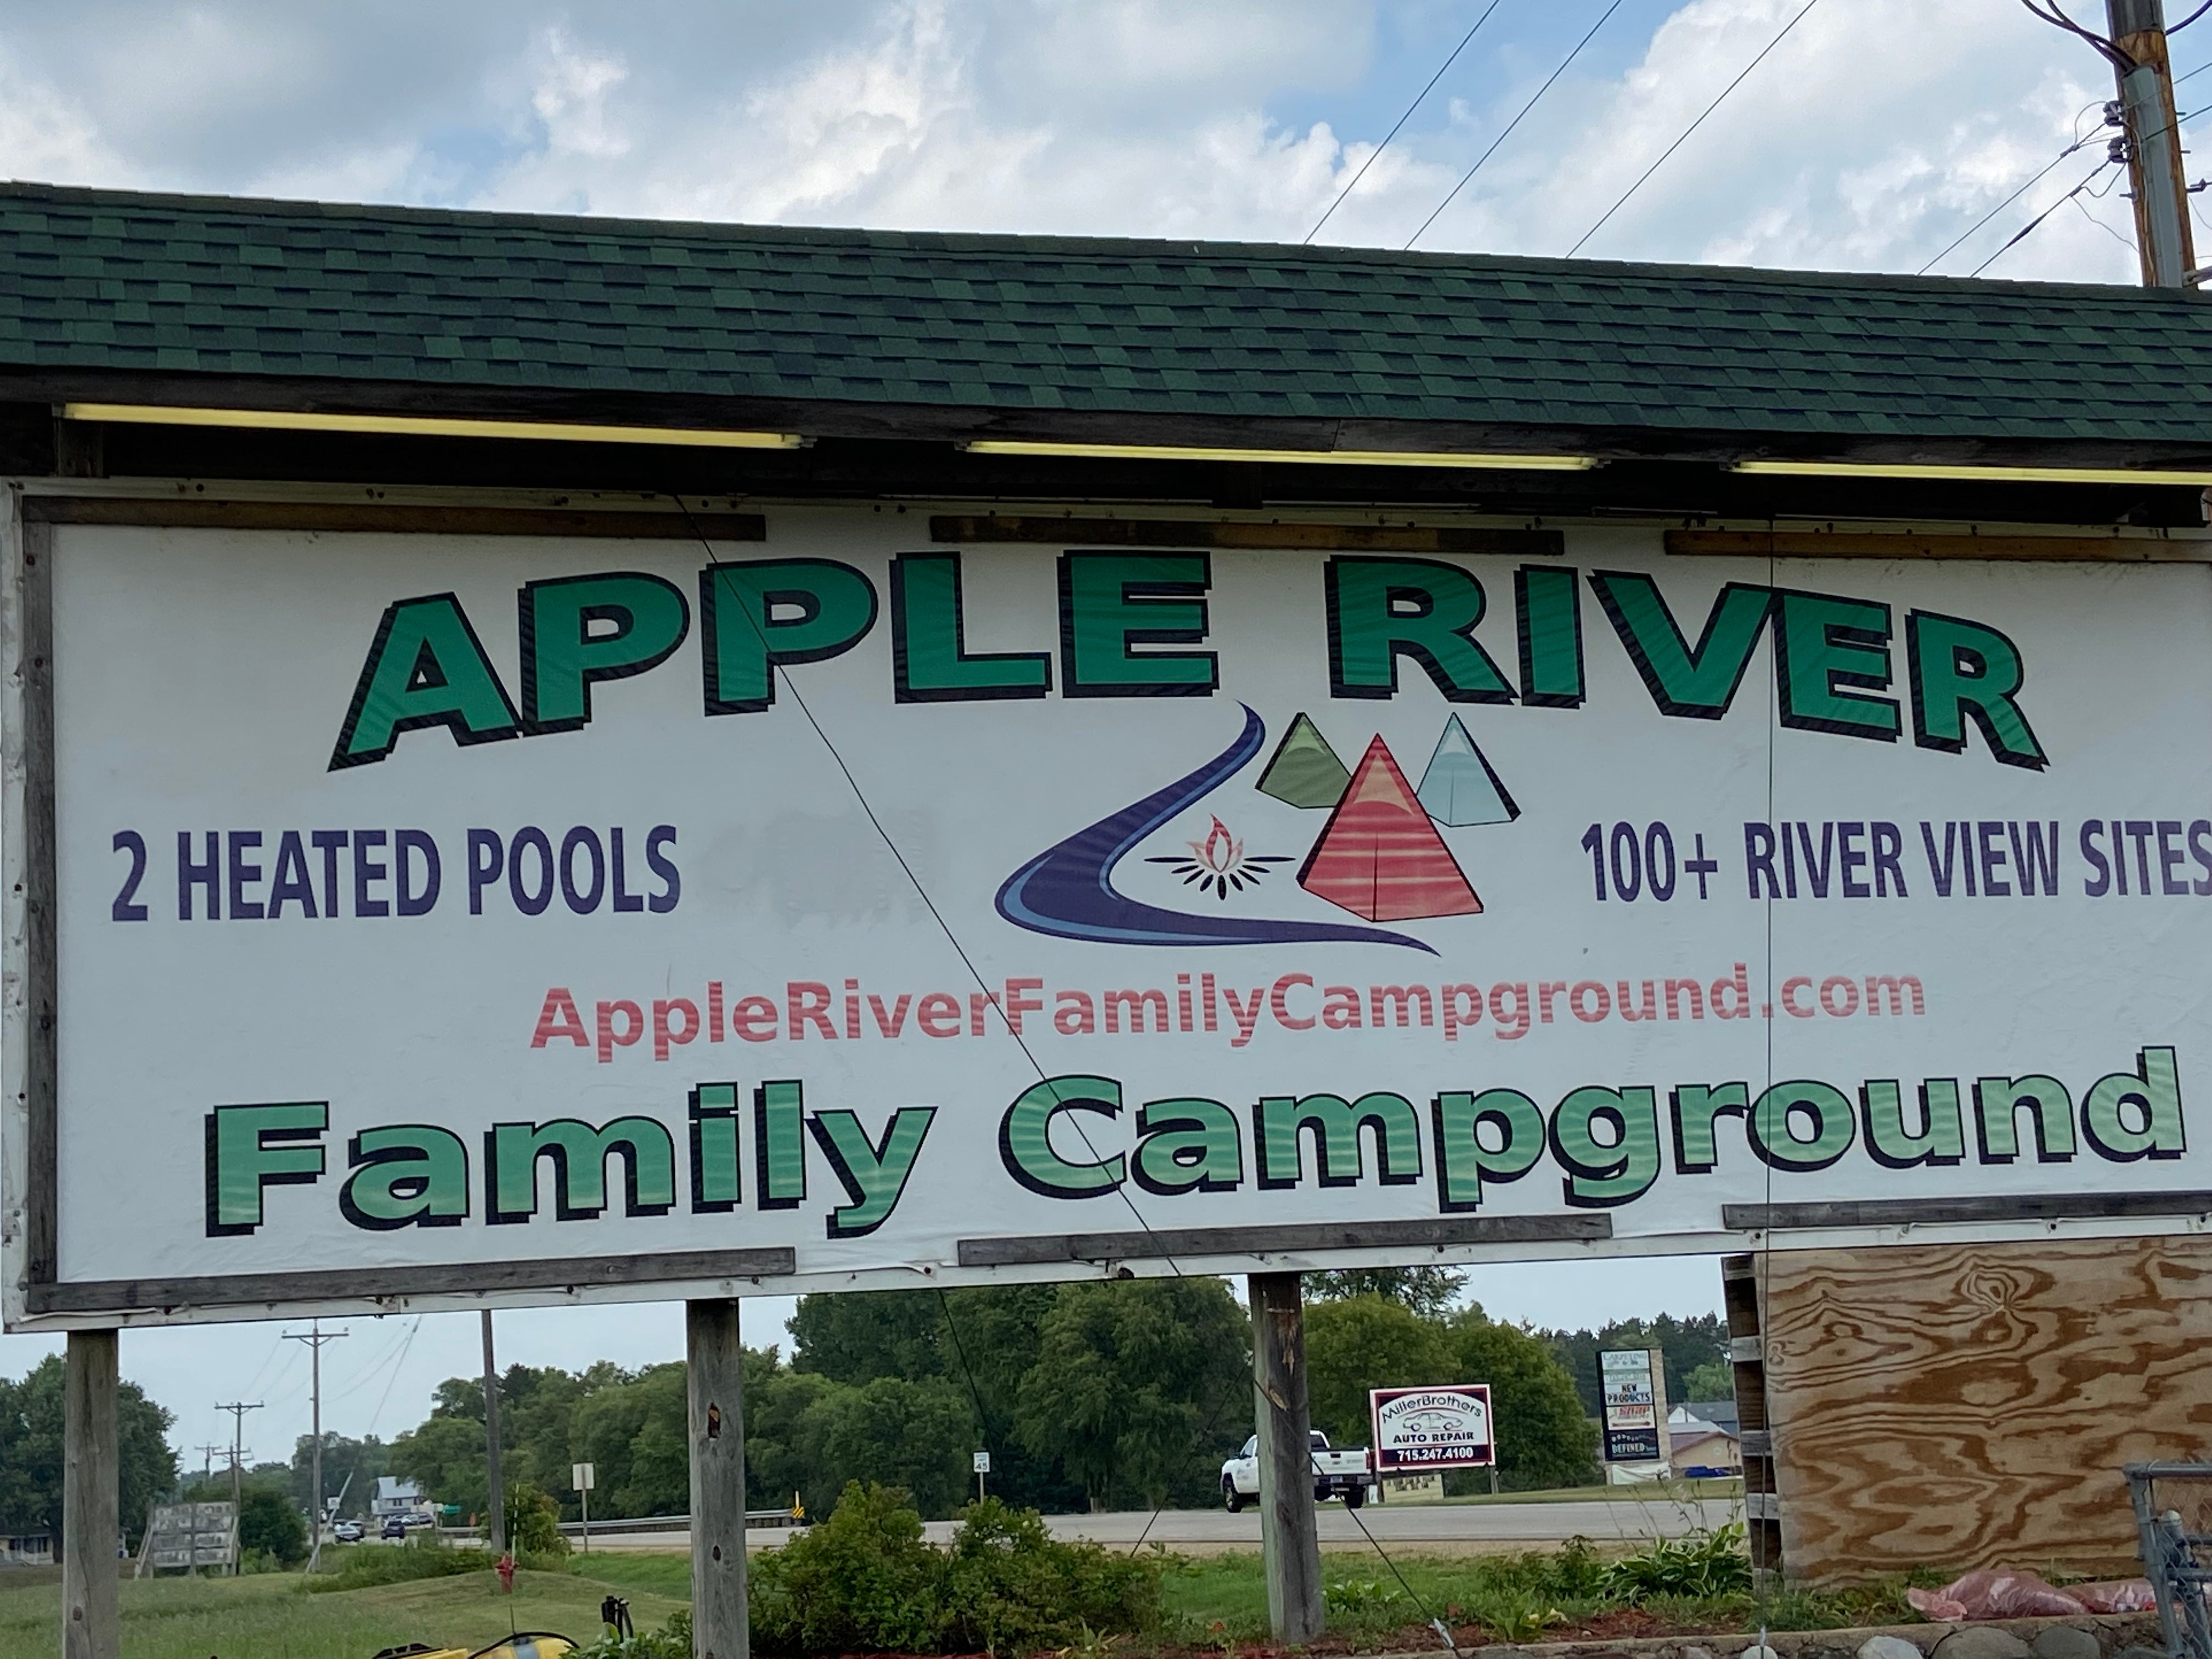 Camper submitted image from Apple River Family Campground - 3